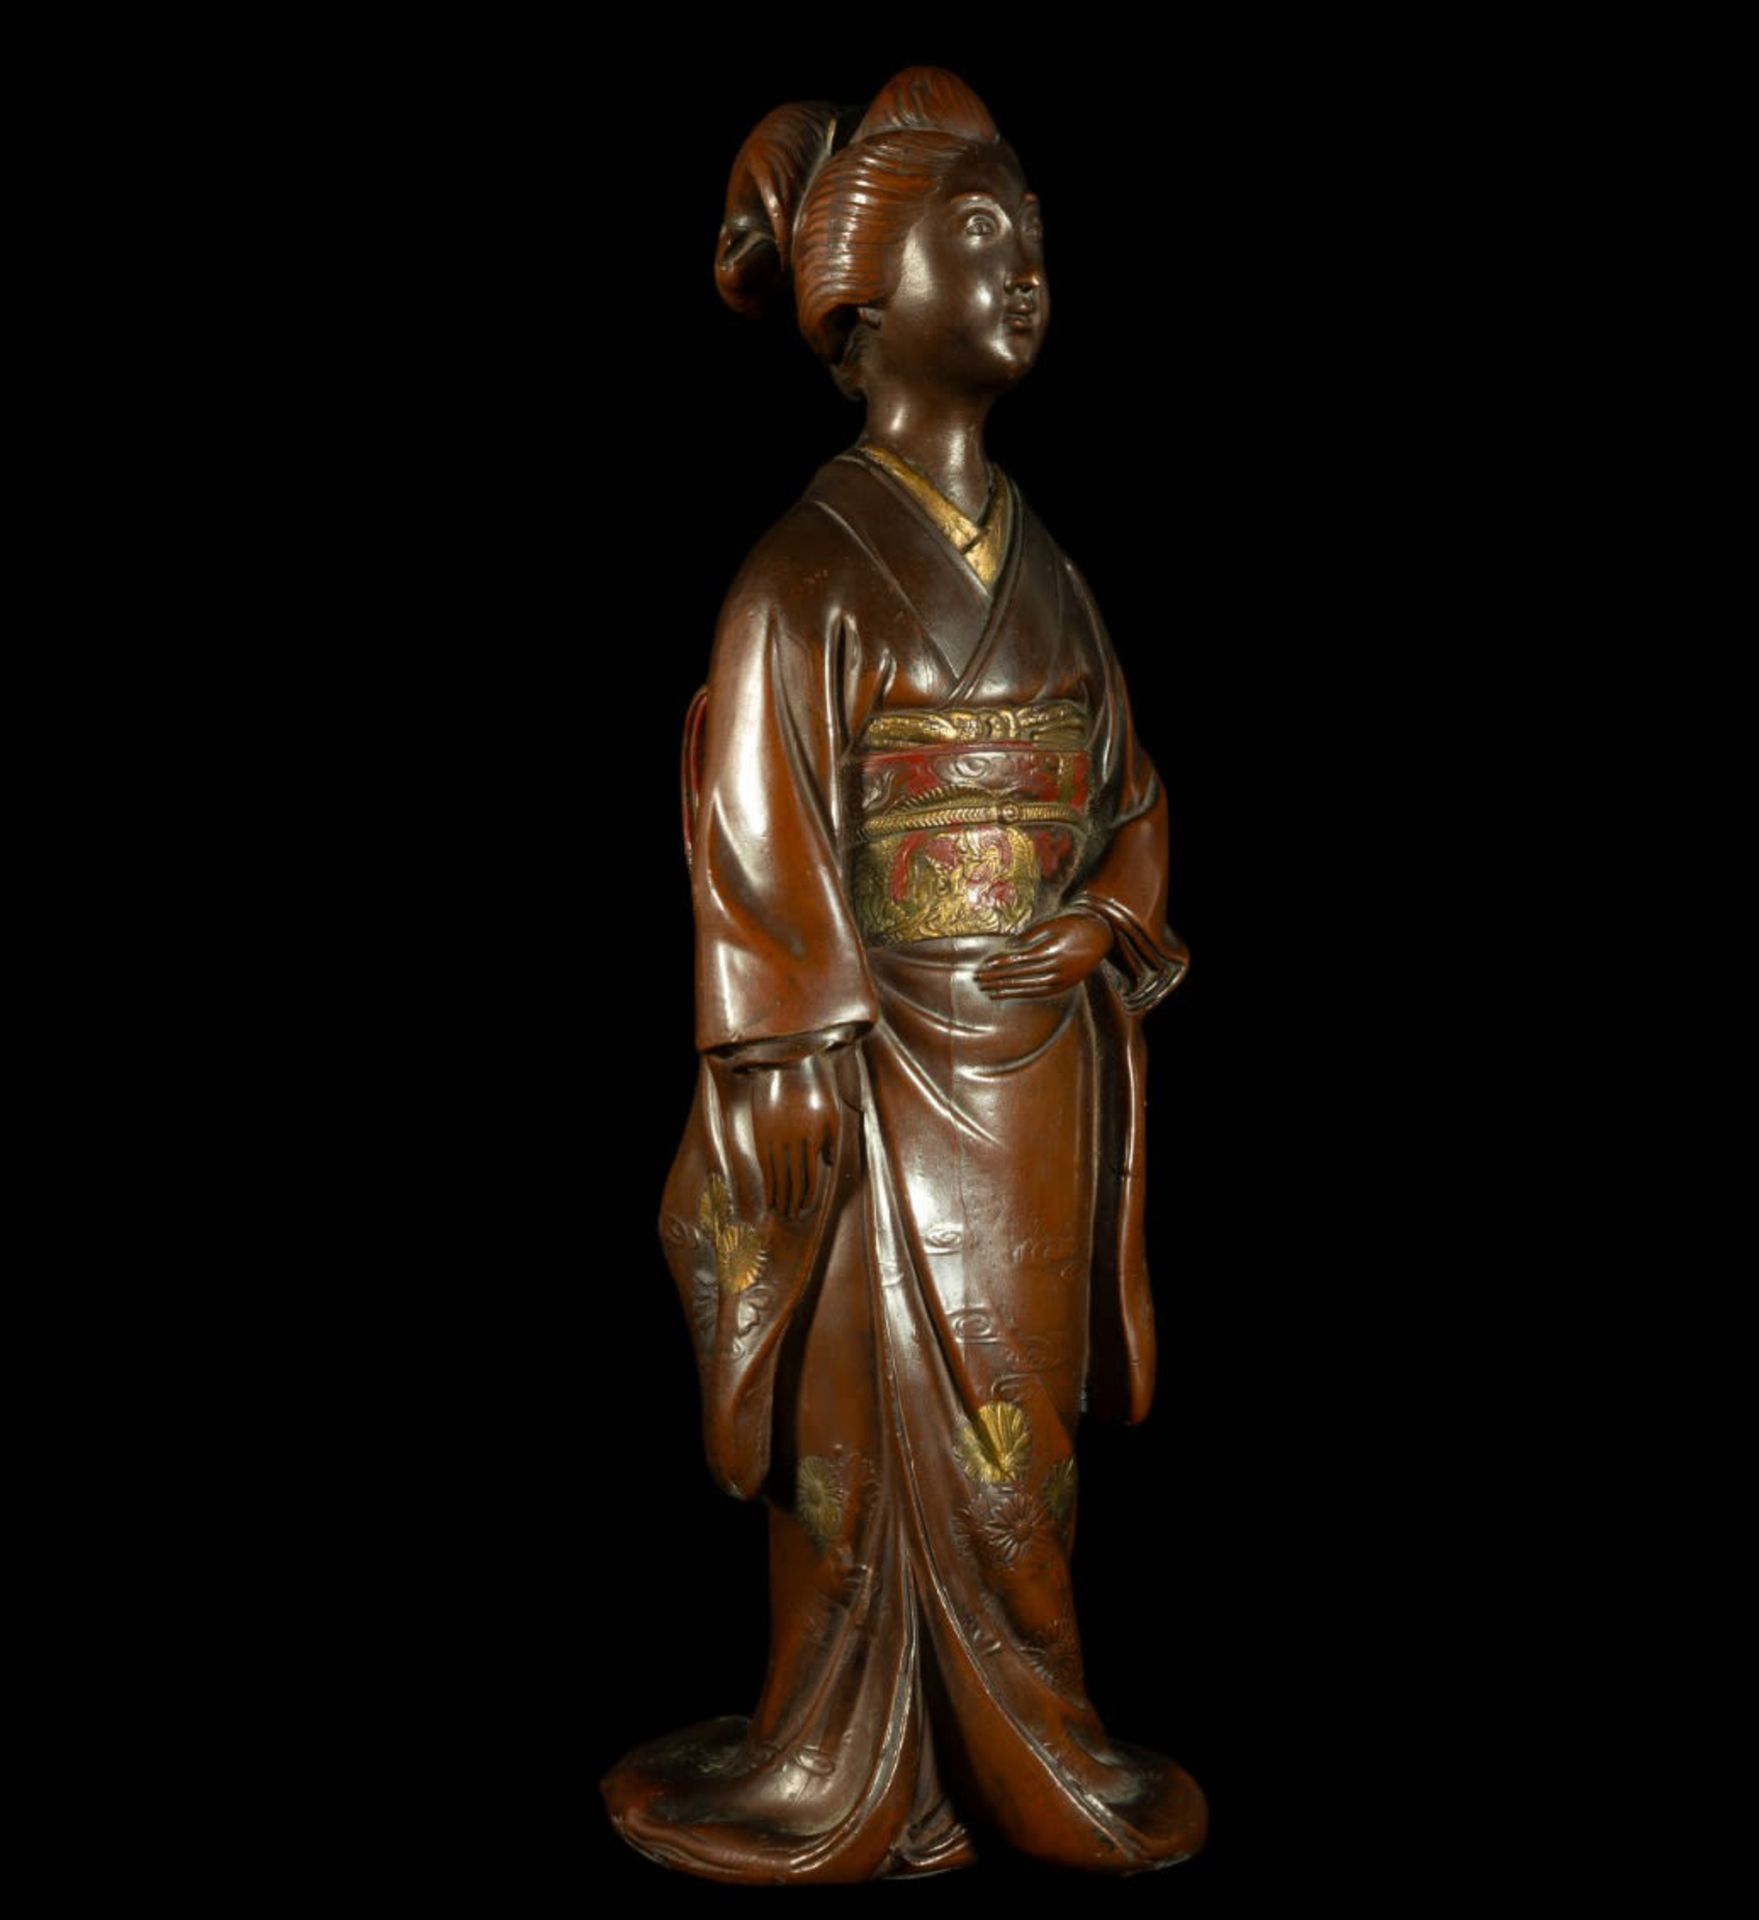 Exquisite Japanese Meiji Geisha in carved and gold-gilt "repoussé" copper, 19th century - Image 4 of 7